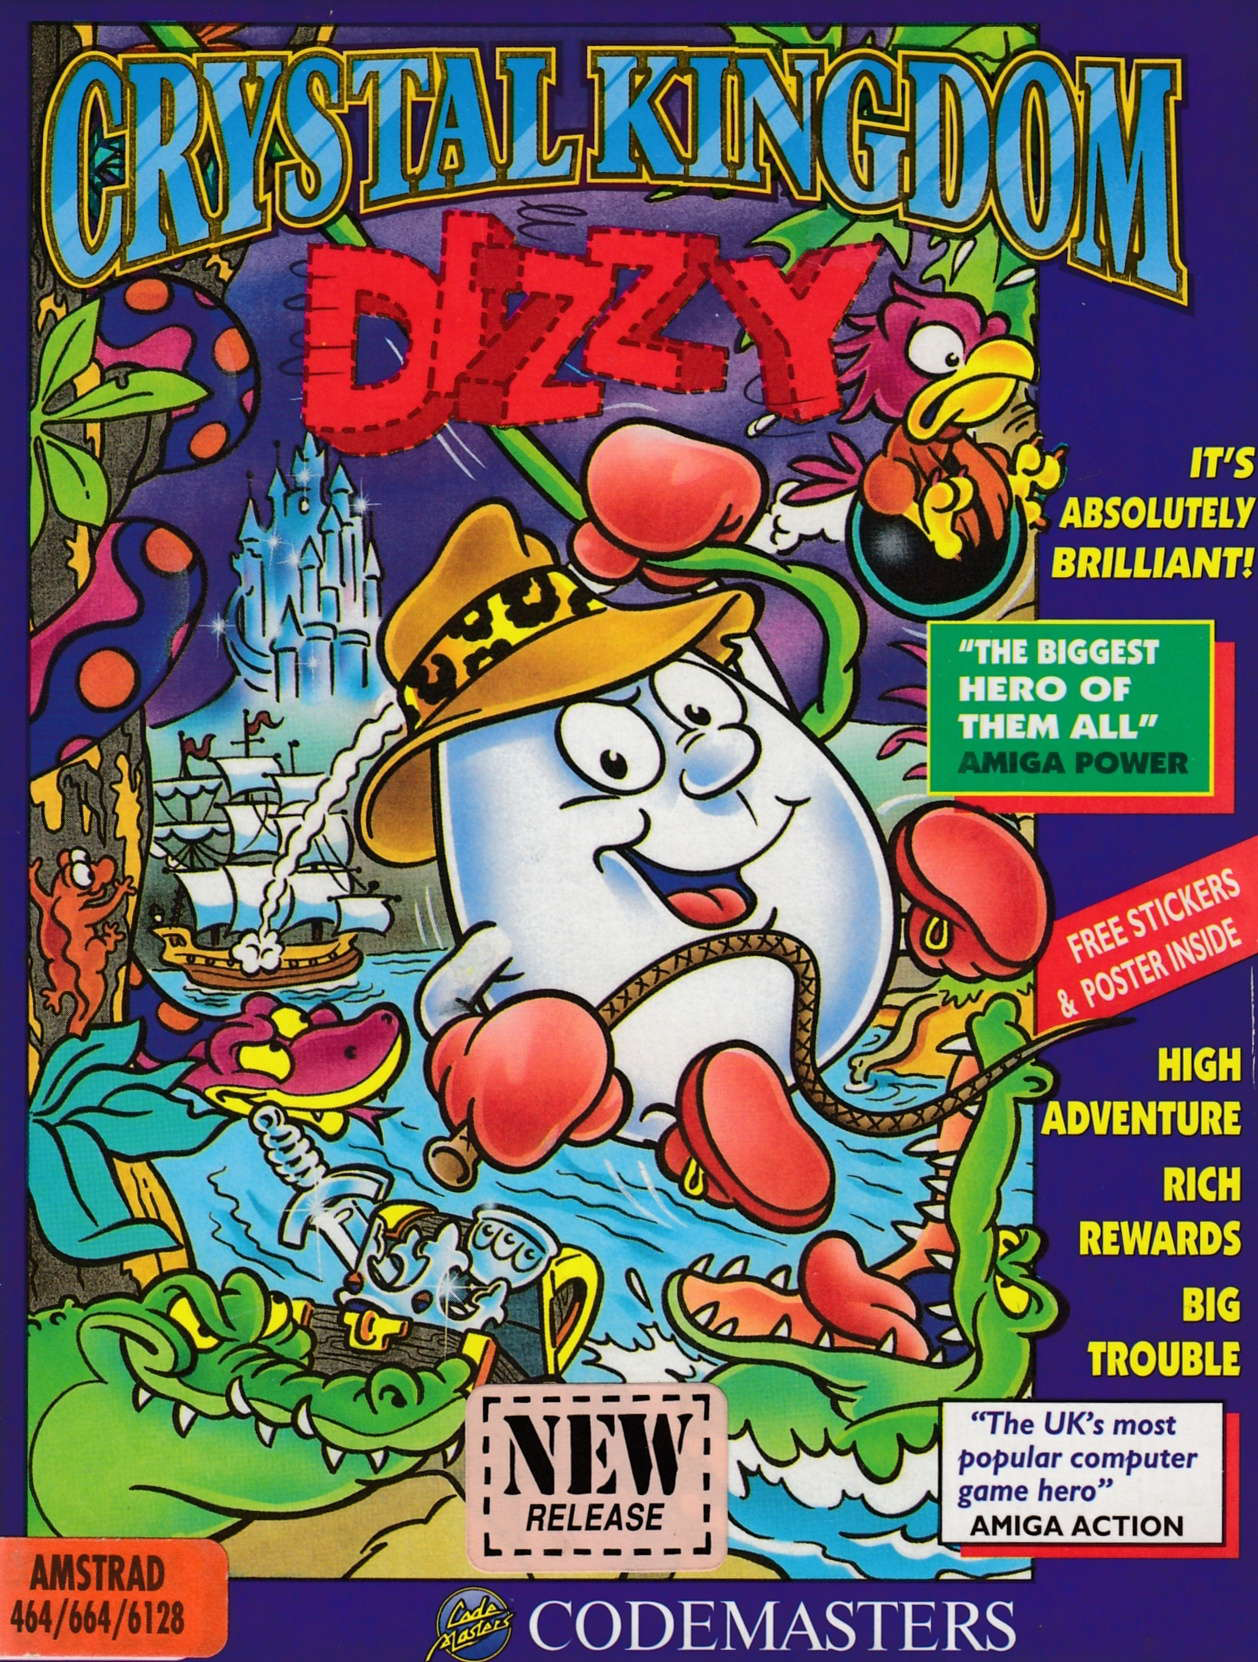 cover of the Amstrad CPC game Crystal Kingdom Dizzy  by GameBase CPC